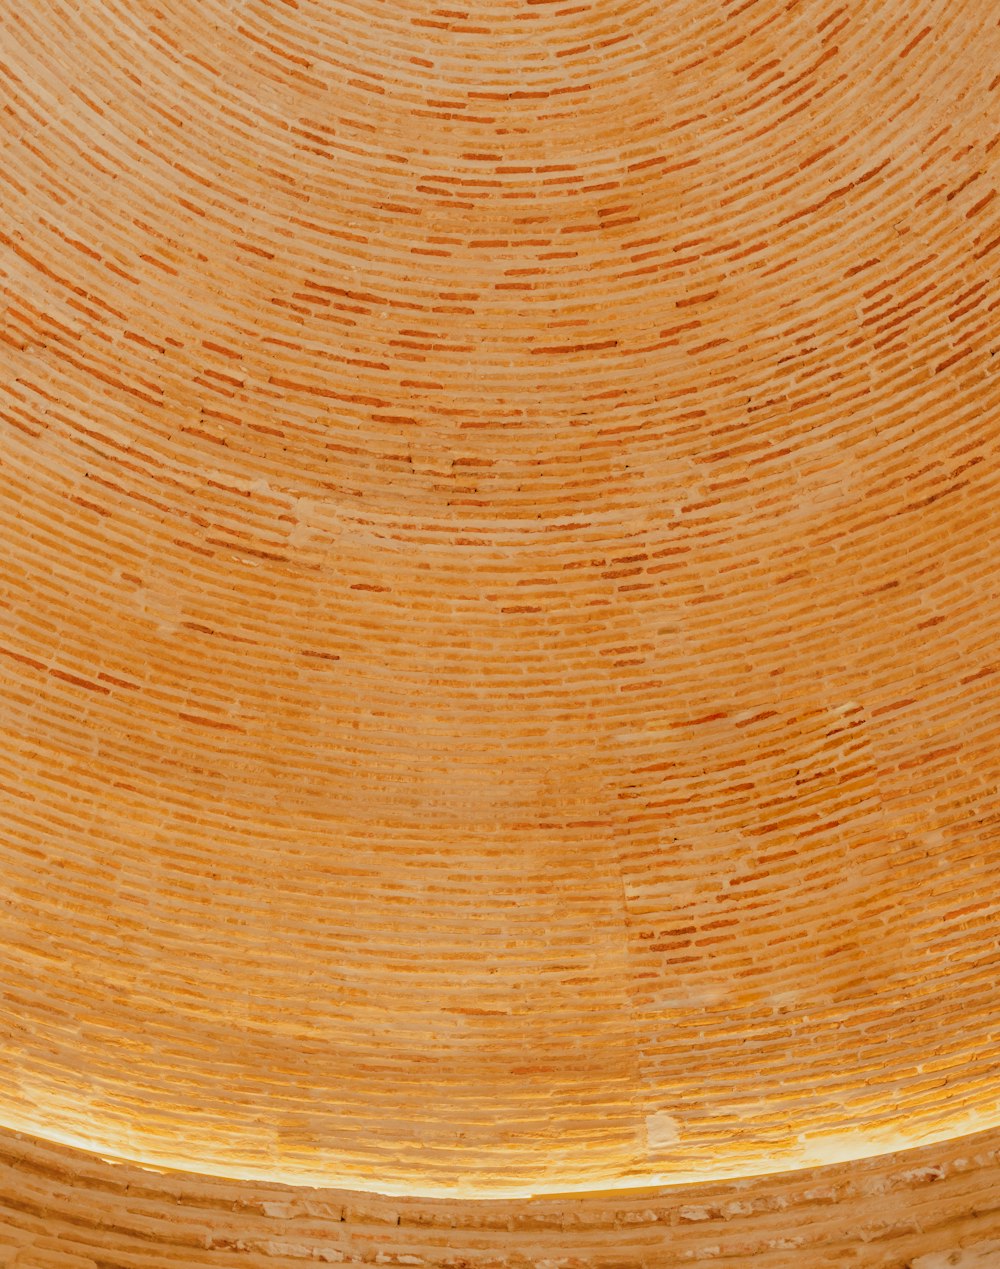 a close up view of a circular wooden structure